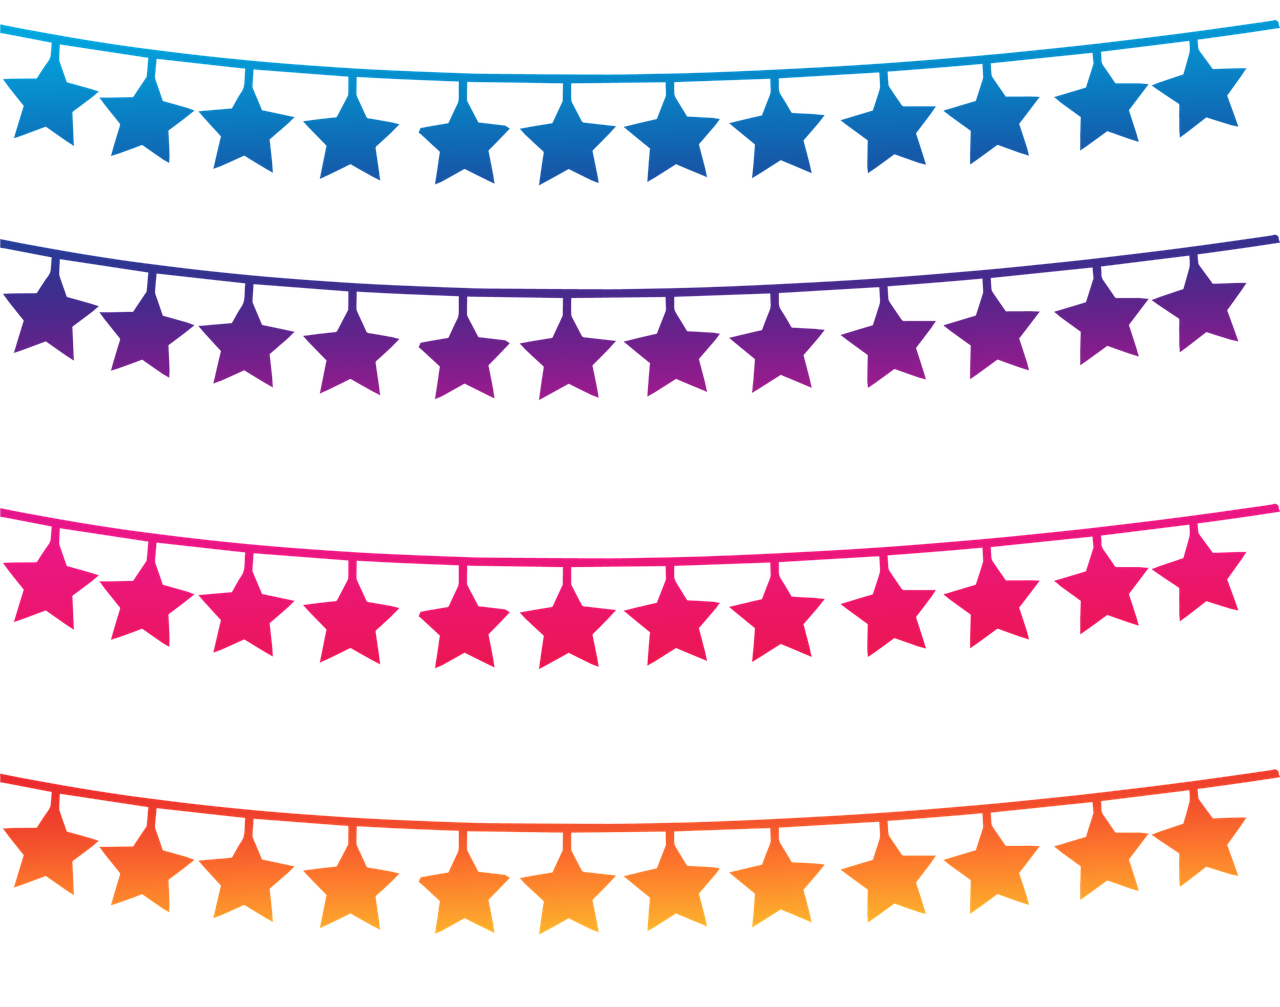 a string of colorful stars on a black background, red banners, blacklight, low resolution, cut